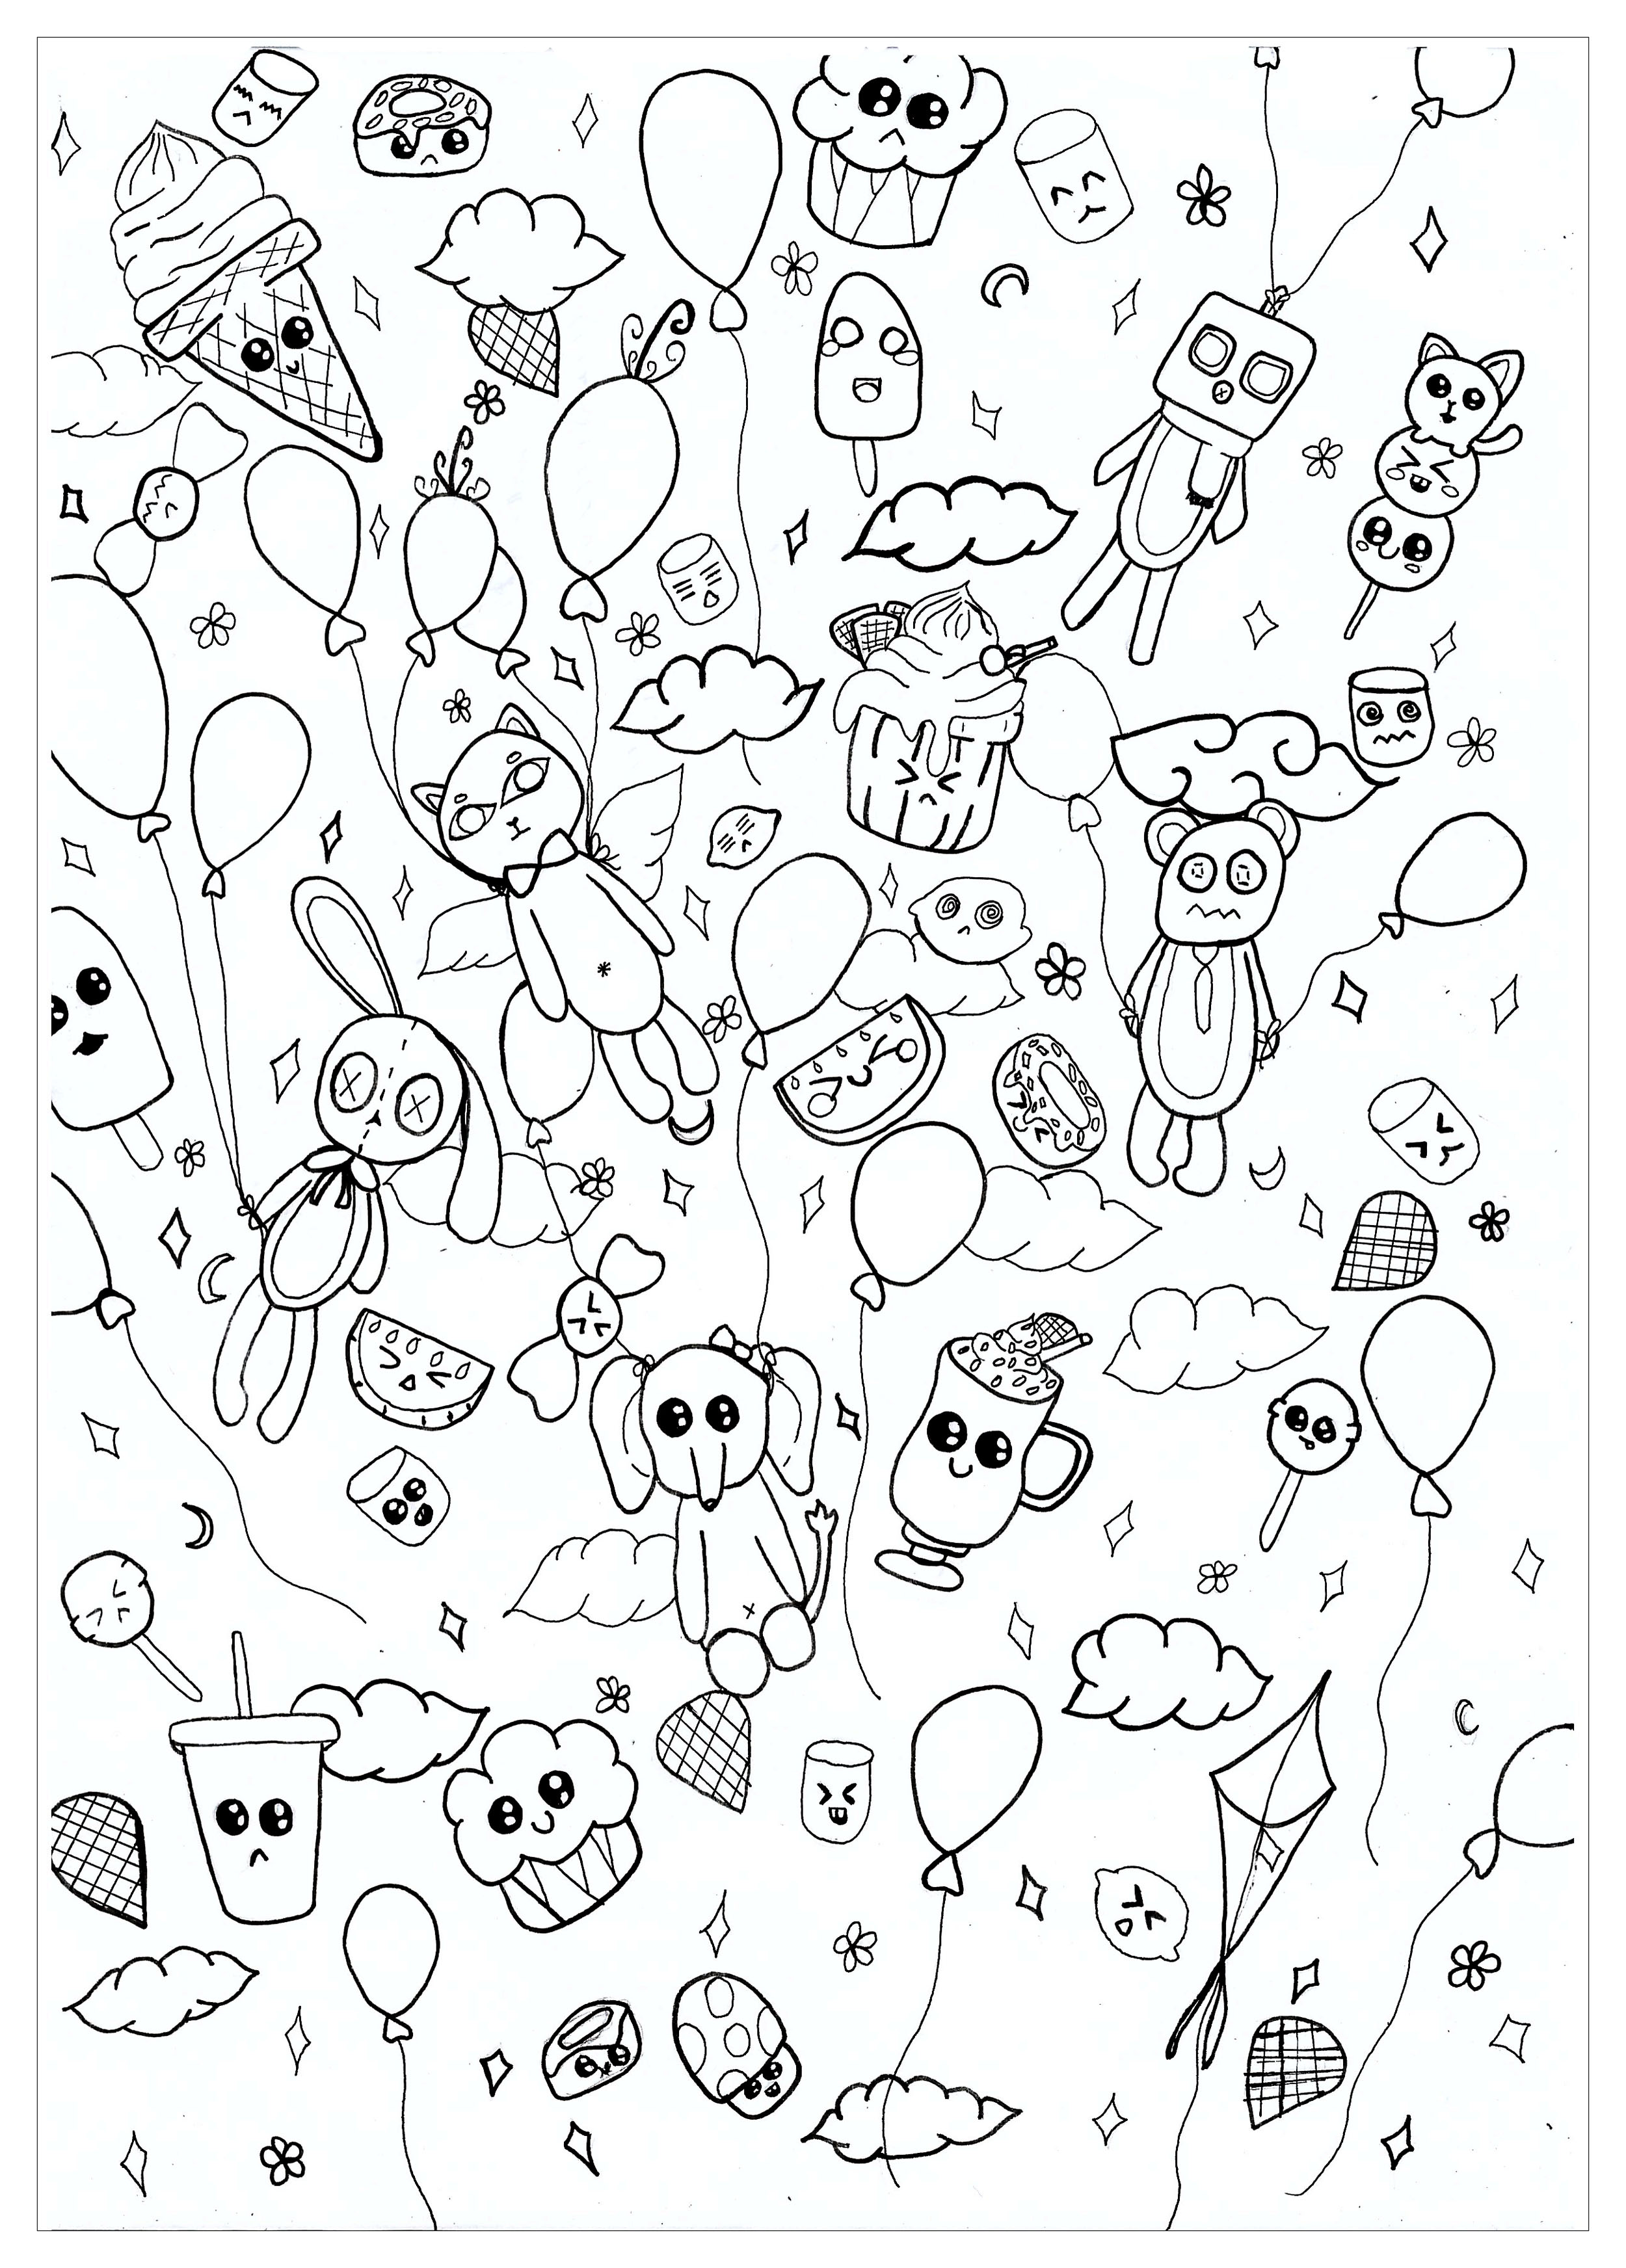 Doodle coloring page of a PARTY with Kawaii characters